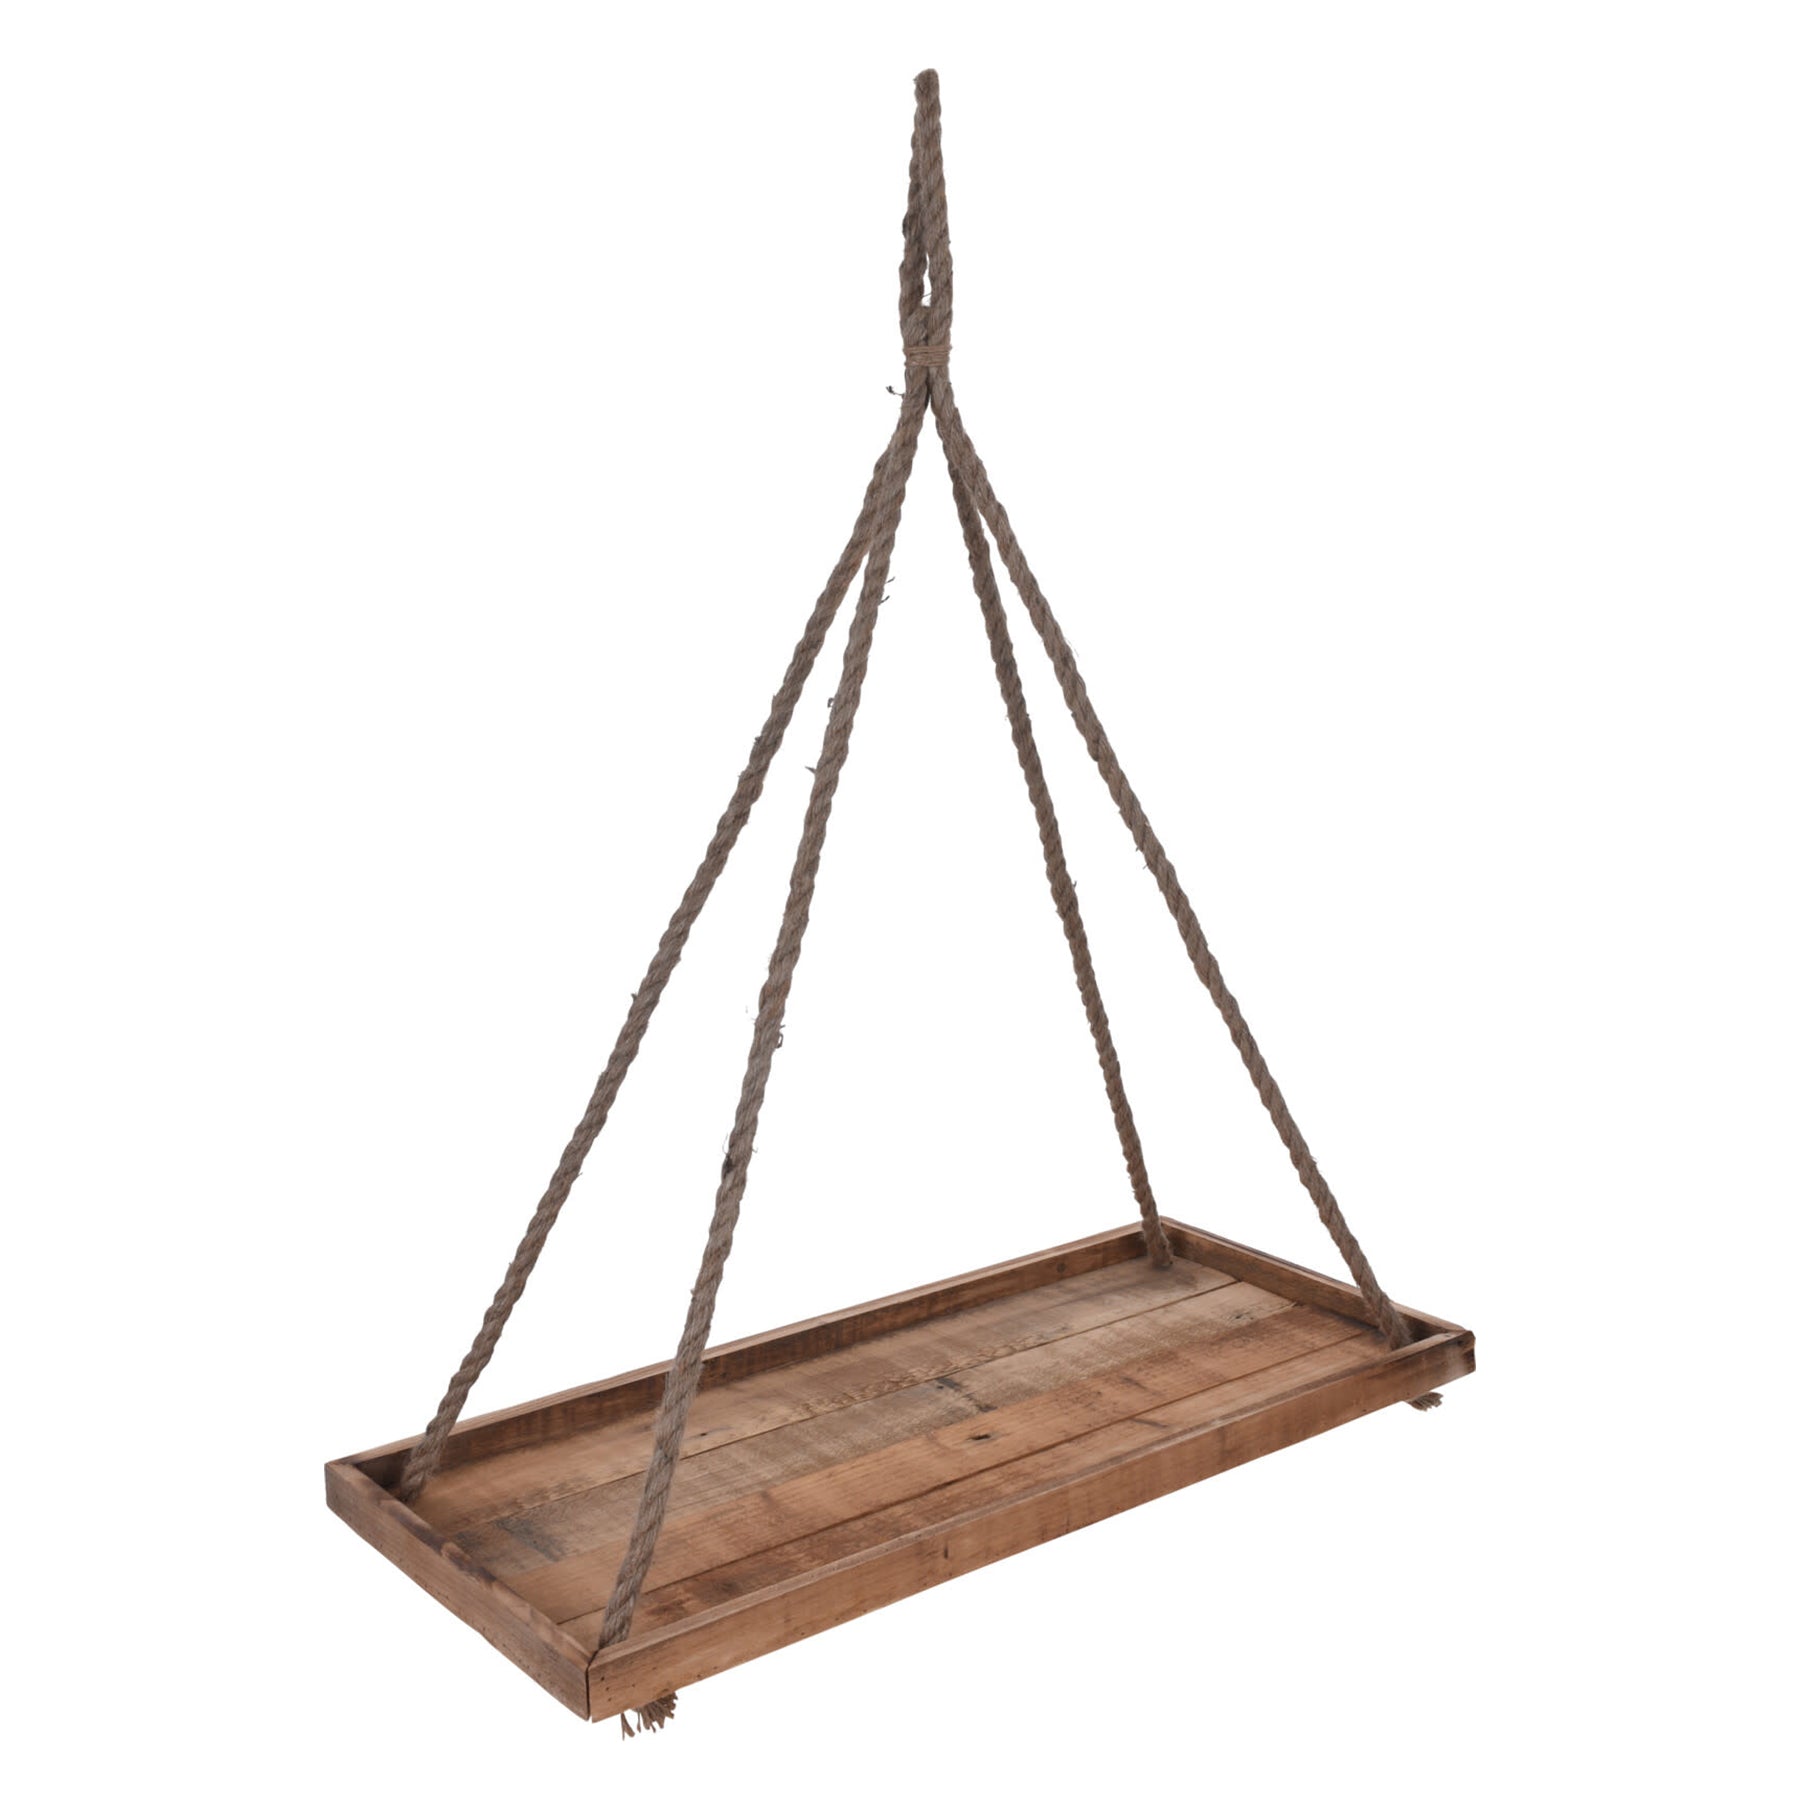 Hanging Tray On Rope